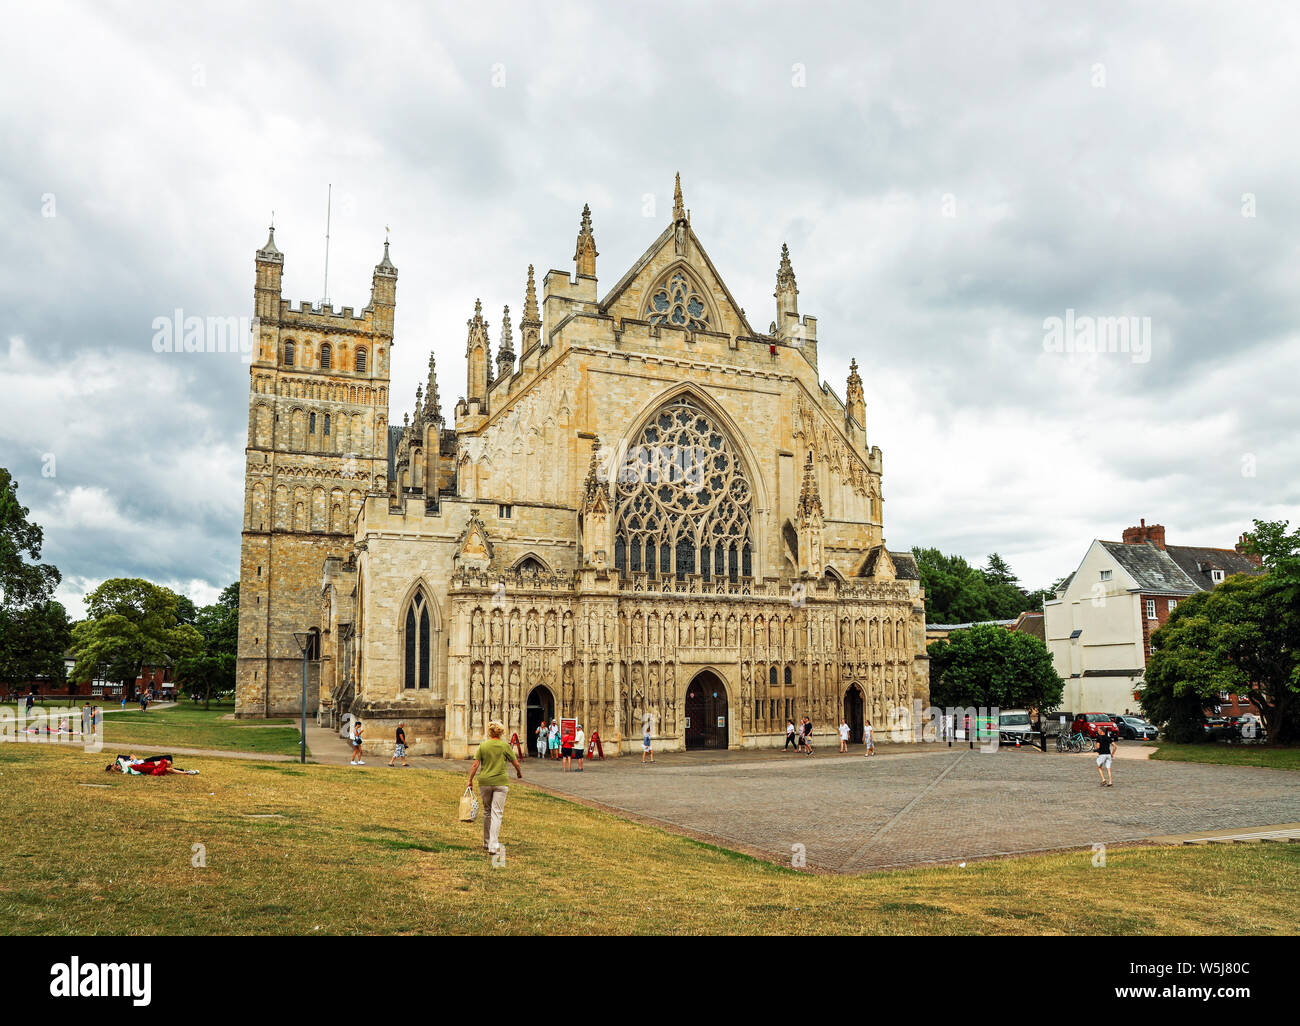 Exeter Cathedral, an historic cathedral dating back to 1270. Twin towers. An Anglican place of worship. Stock Photo